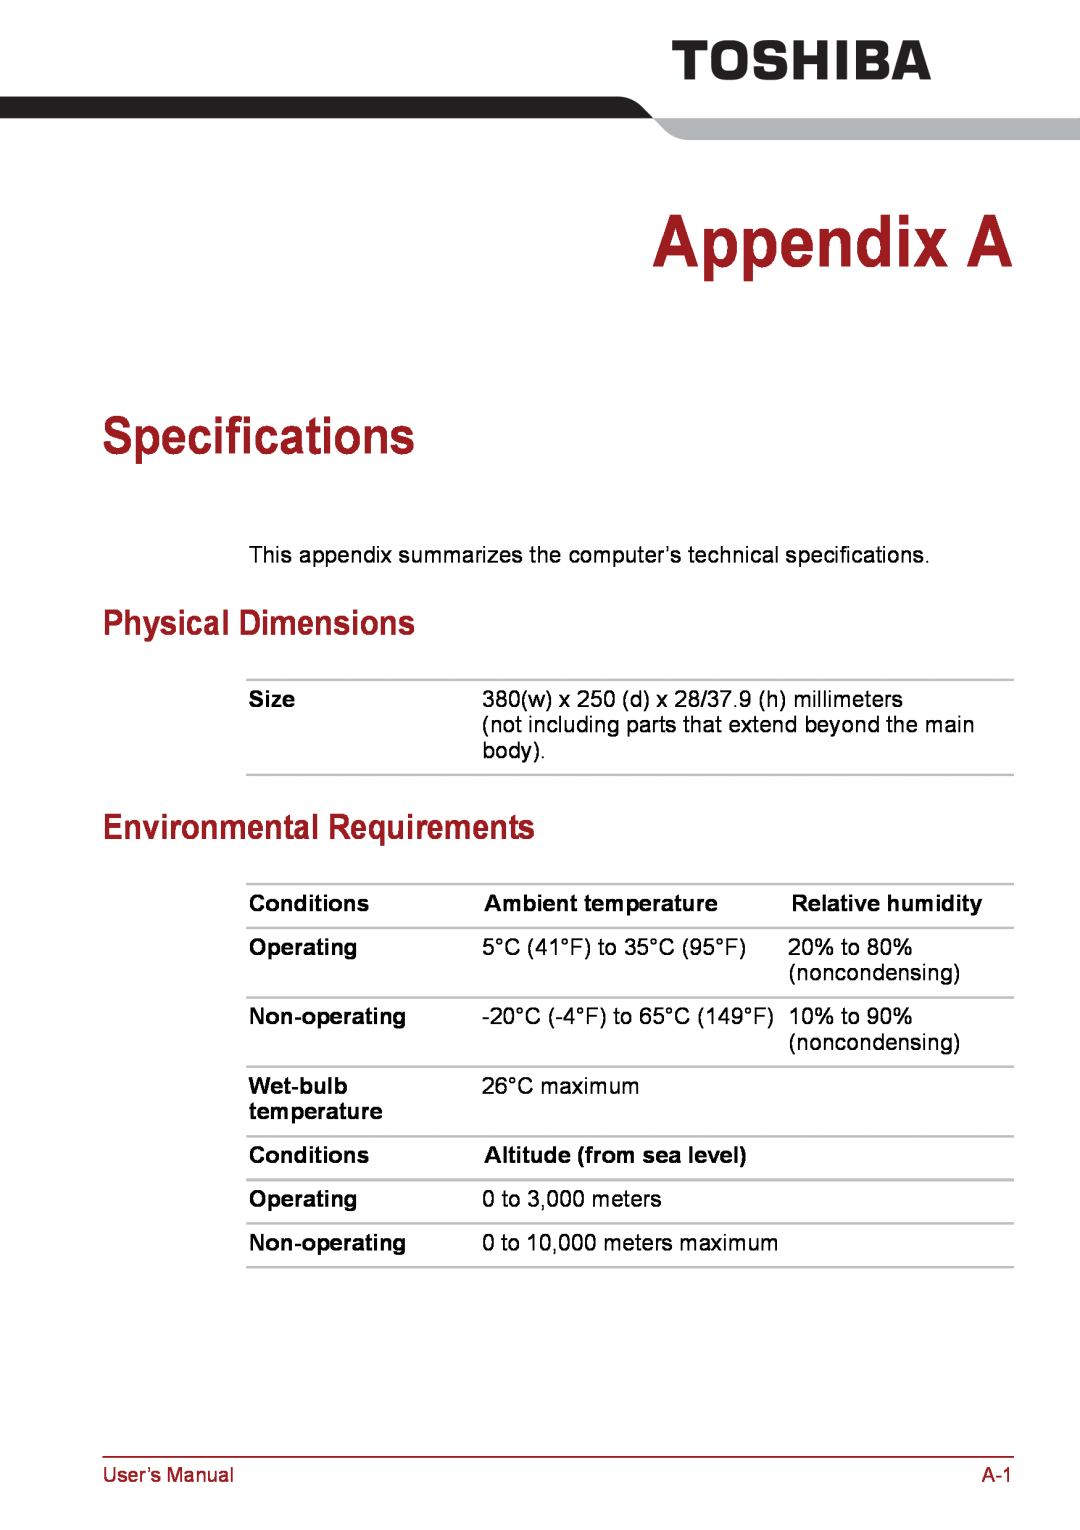 Toshiba PSC08U-02D01D Appendix A, Specifications, Physical Dimensions, Environmental Requirements, Size, Conditions 